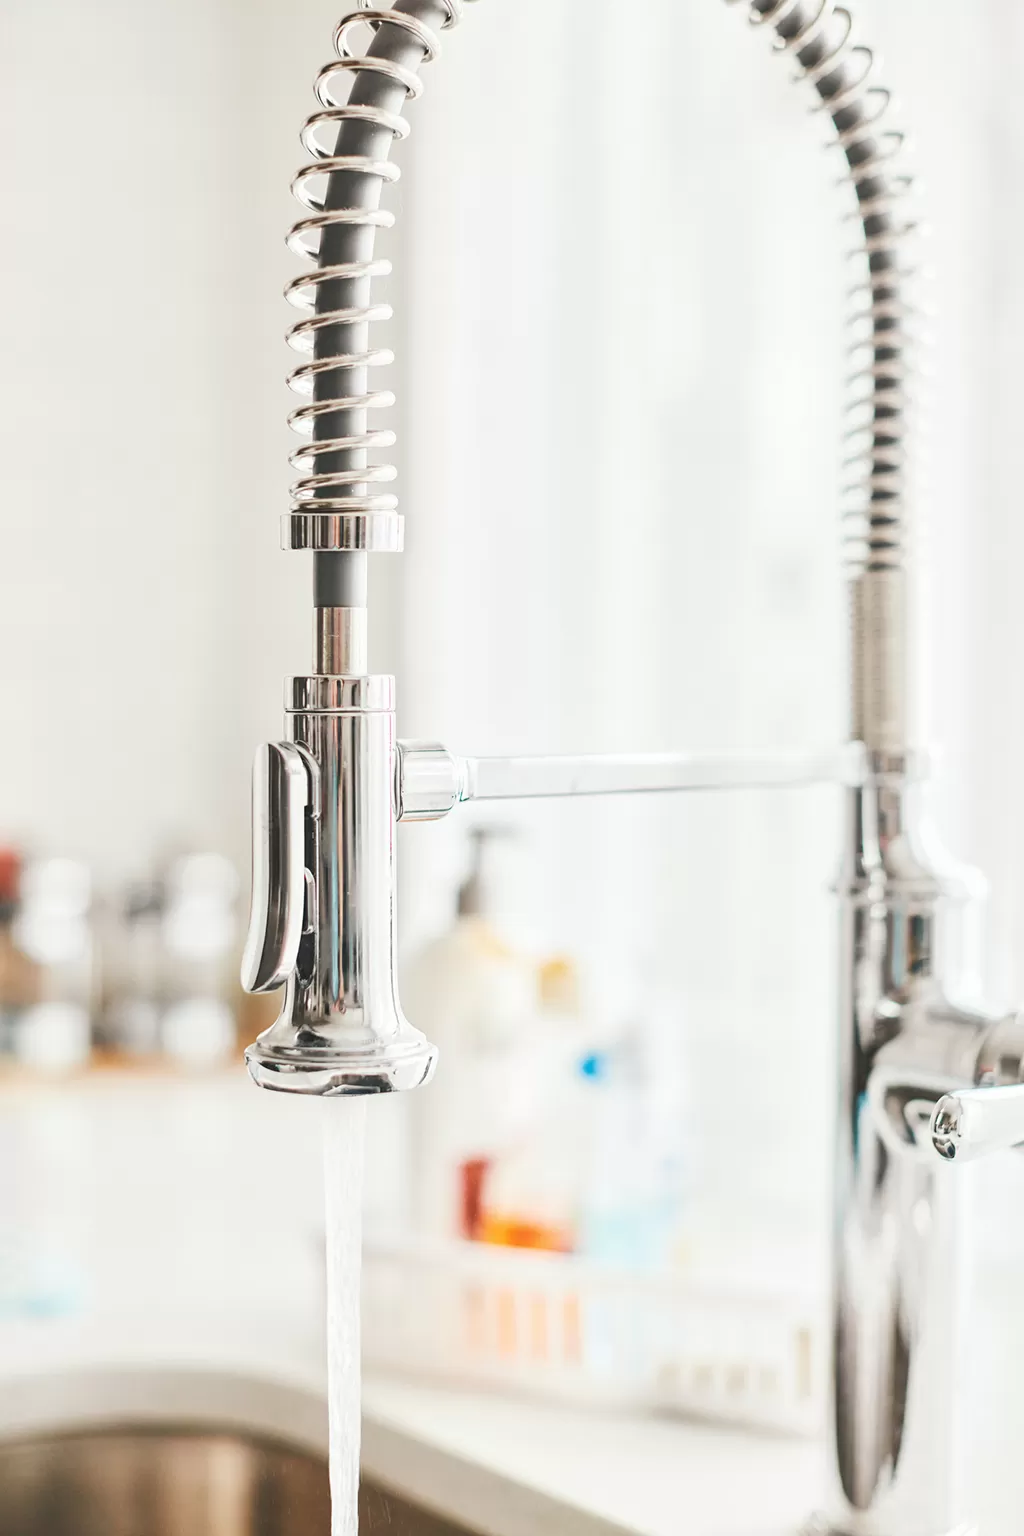 What to Look for When Buying a New Faucet